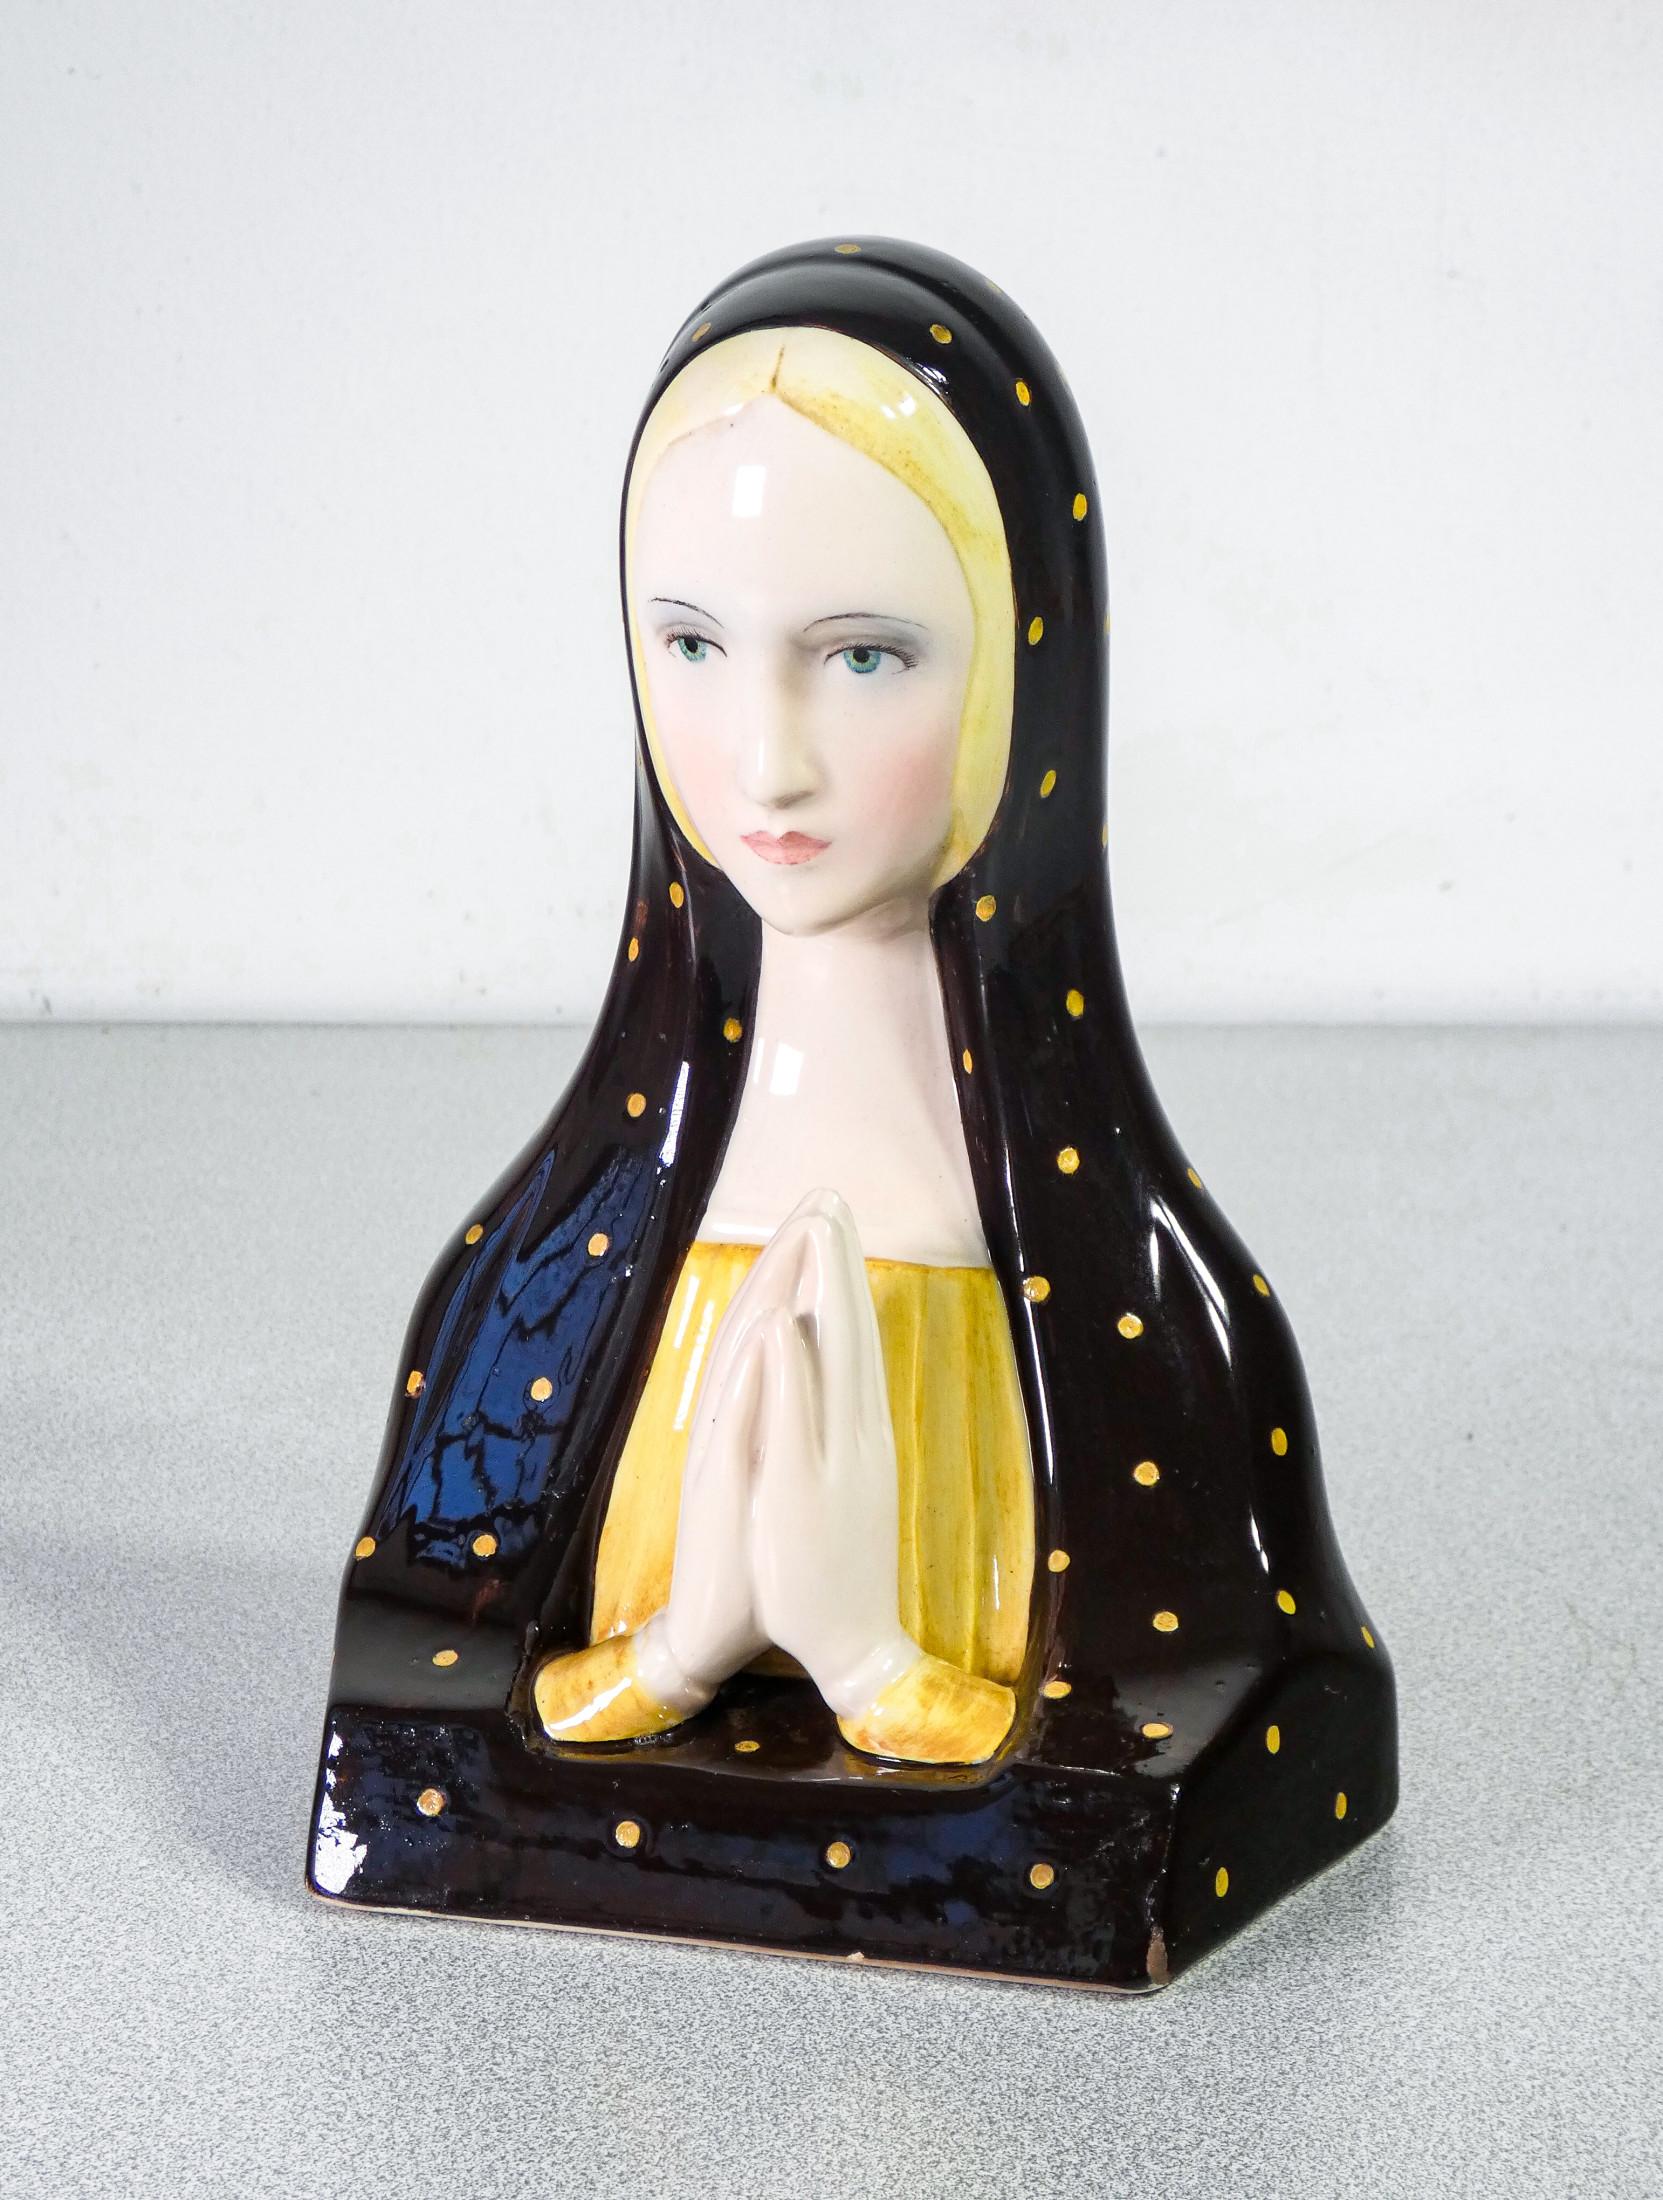 Ceramic sculpture
by Paola BOLOGNA
for LENCI,
Holy Mary

ORIGIN
Turin, Italy

PERIOD
30s

AUTHOR
Paola BOLOGNA
The painter and illustrator of noble origins Paola Bologna was born in Turin in 1898. She completed her artistic studies at